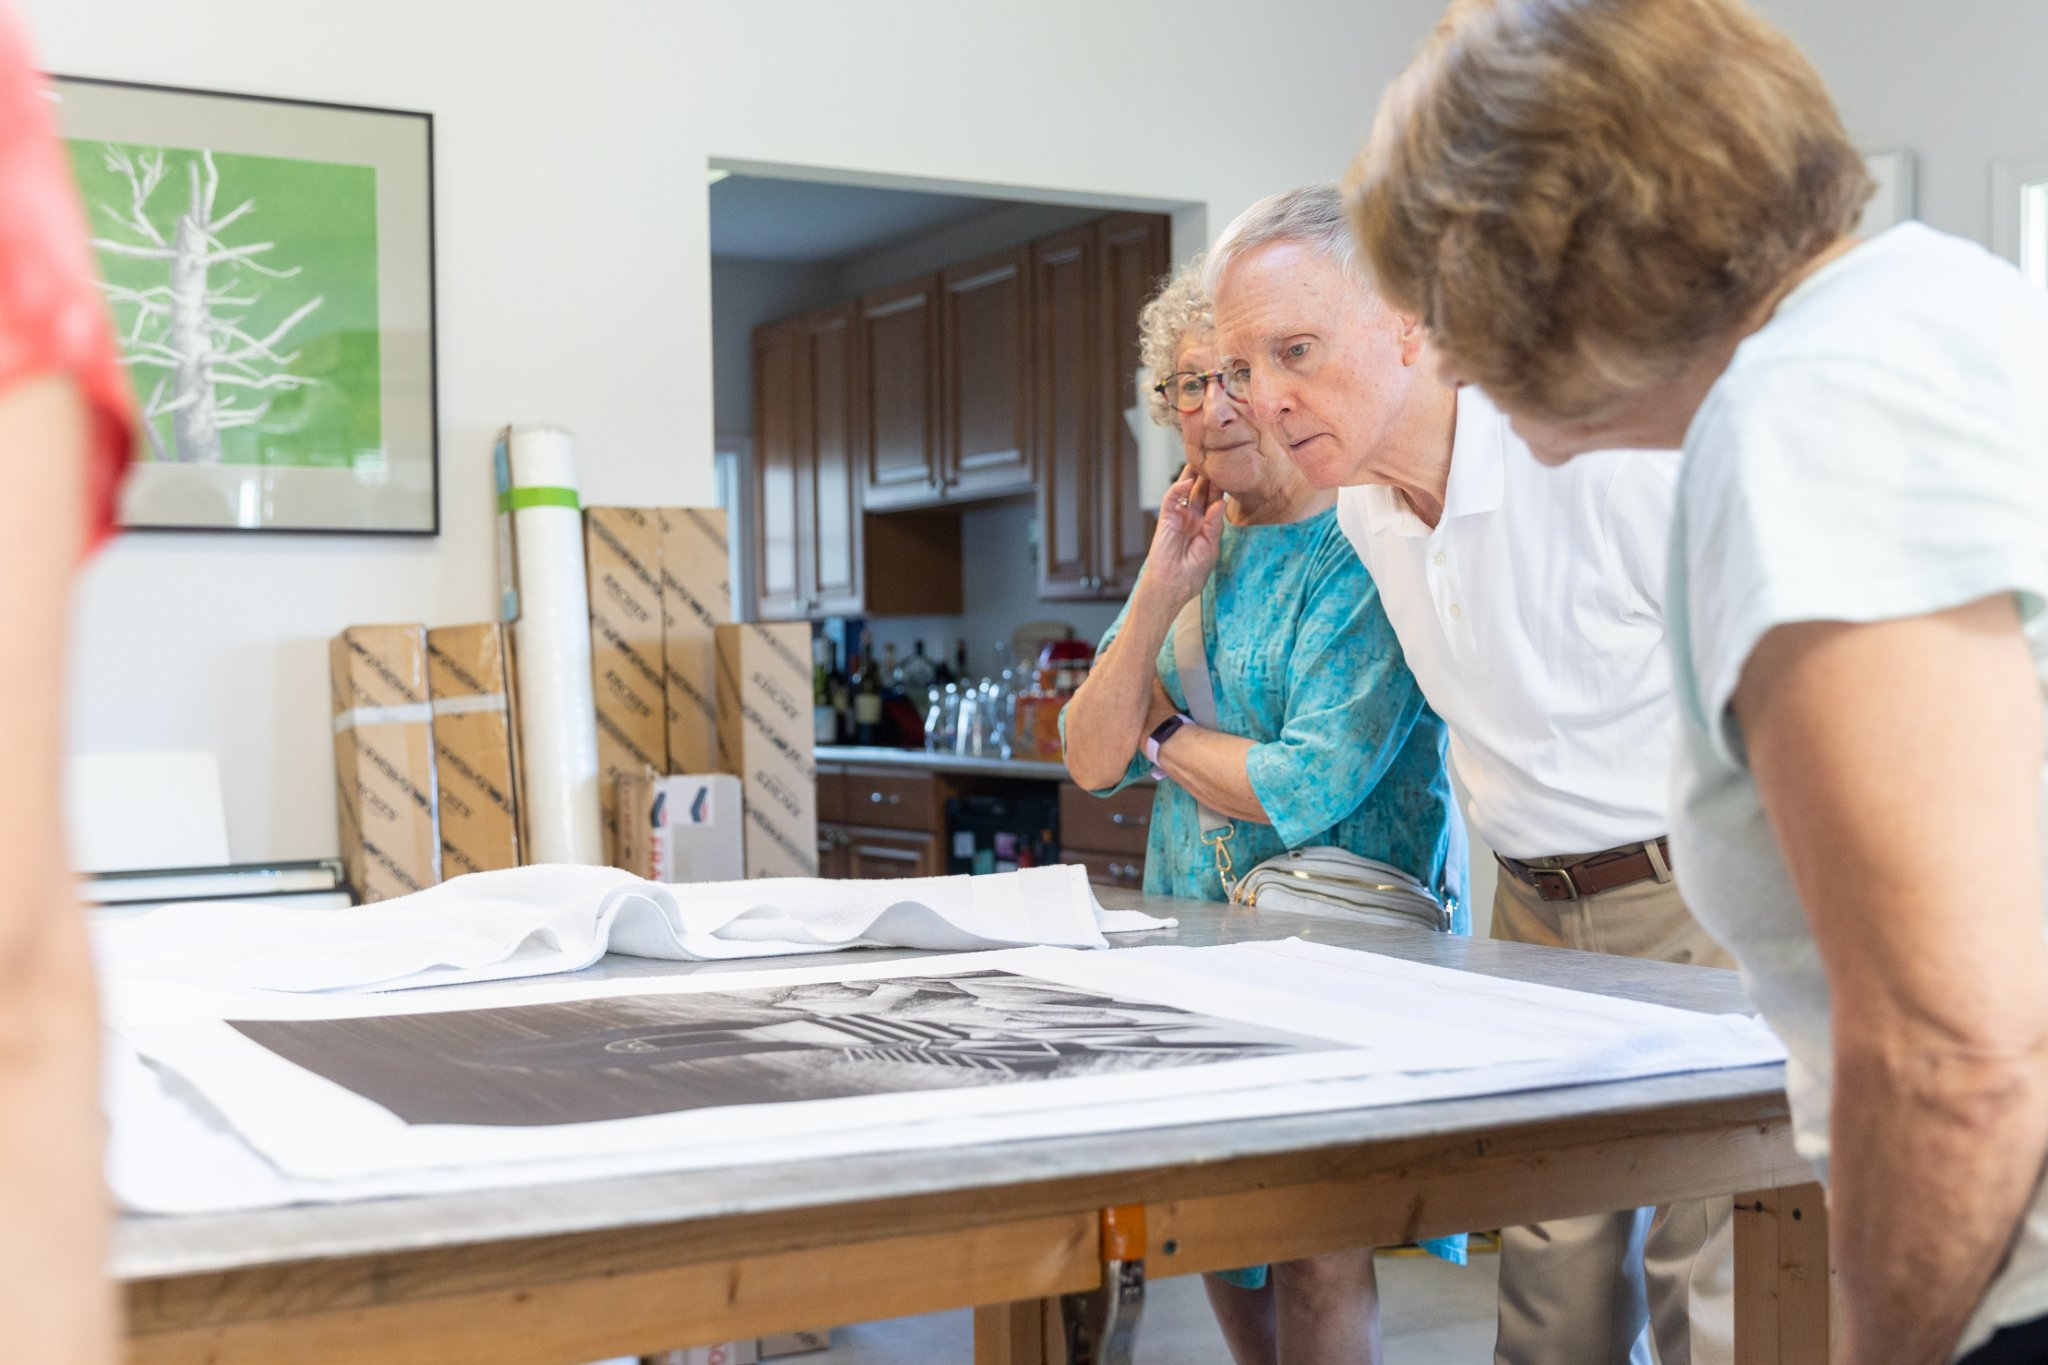 KU senior community members looking down at an etching example on a large table